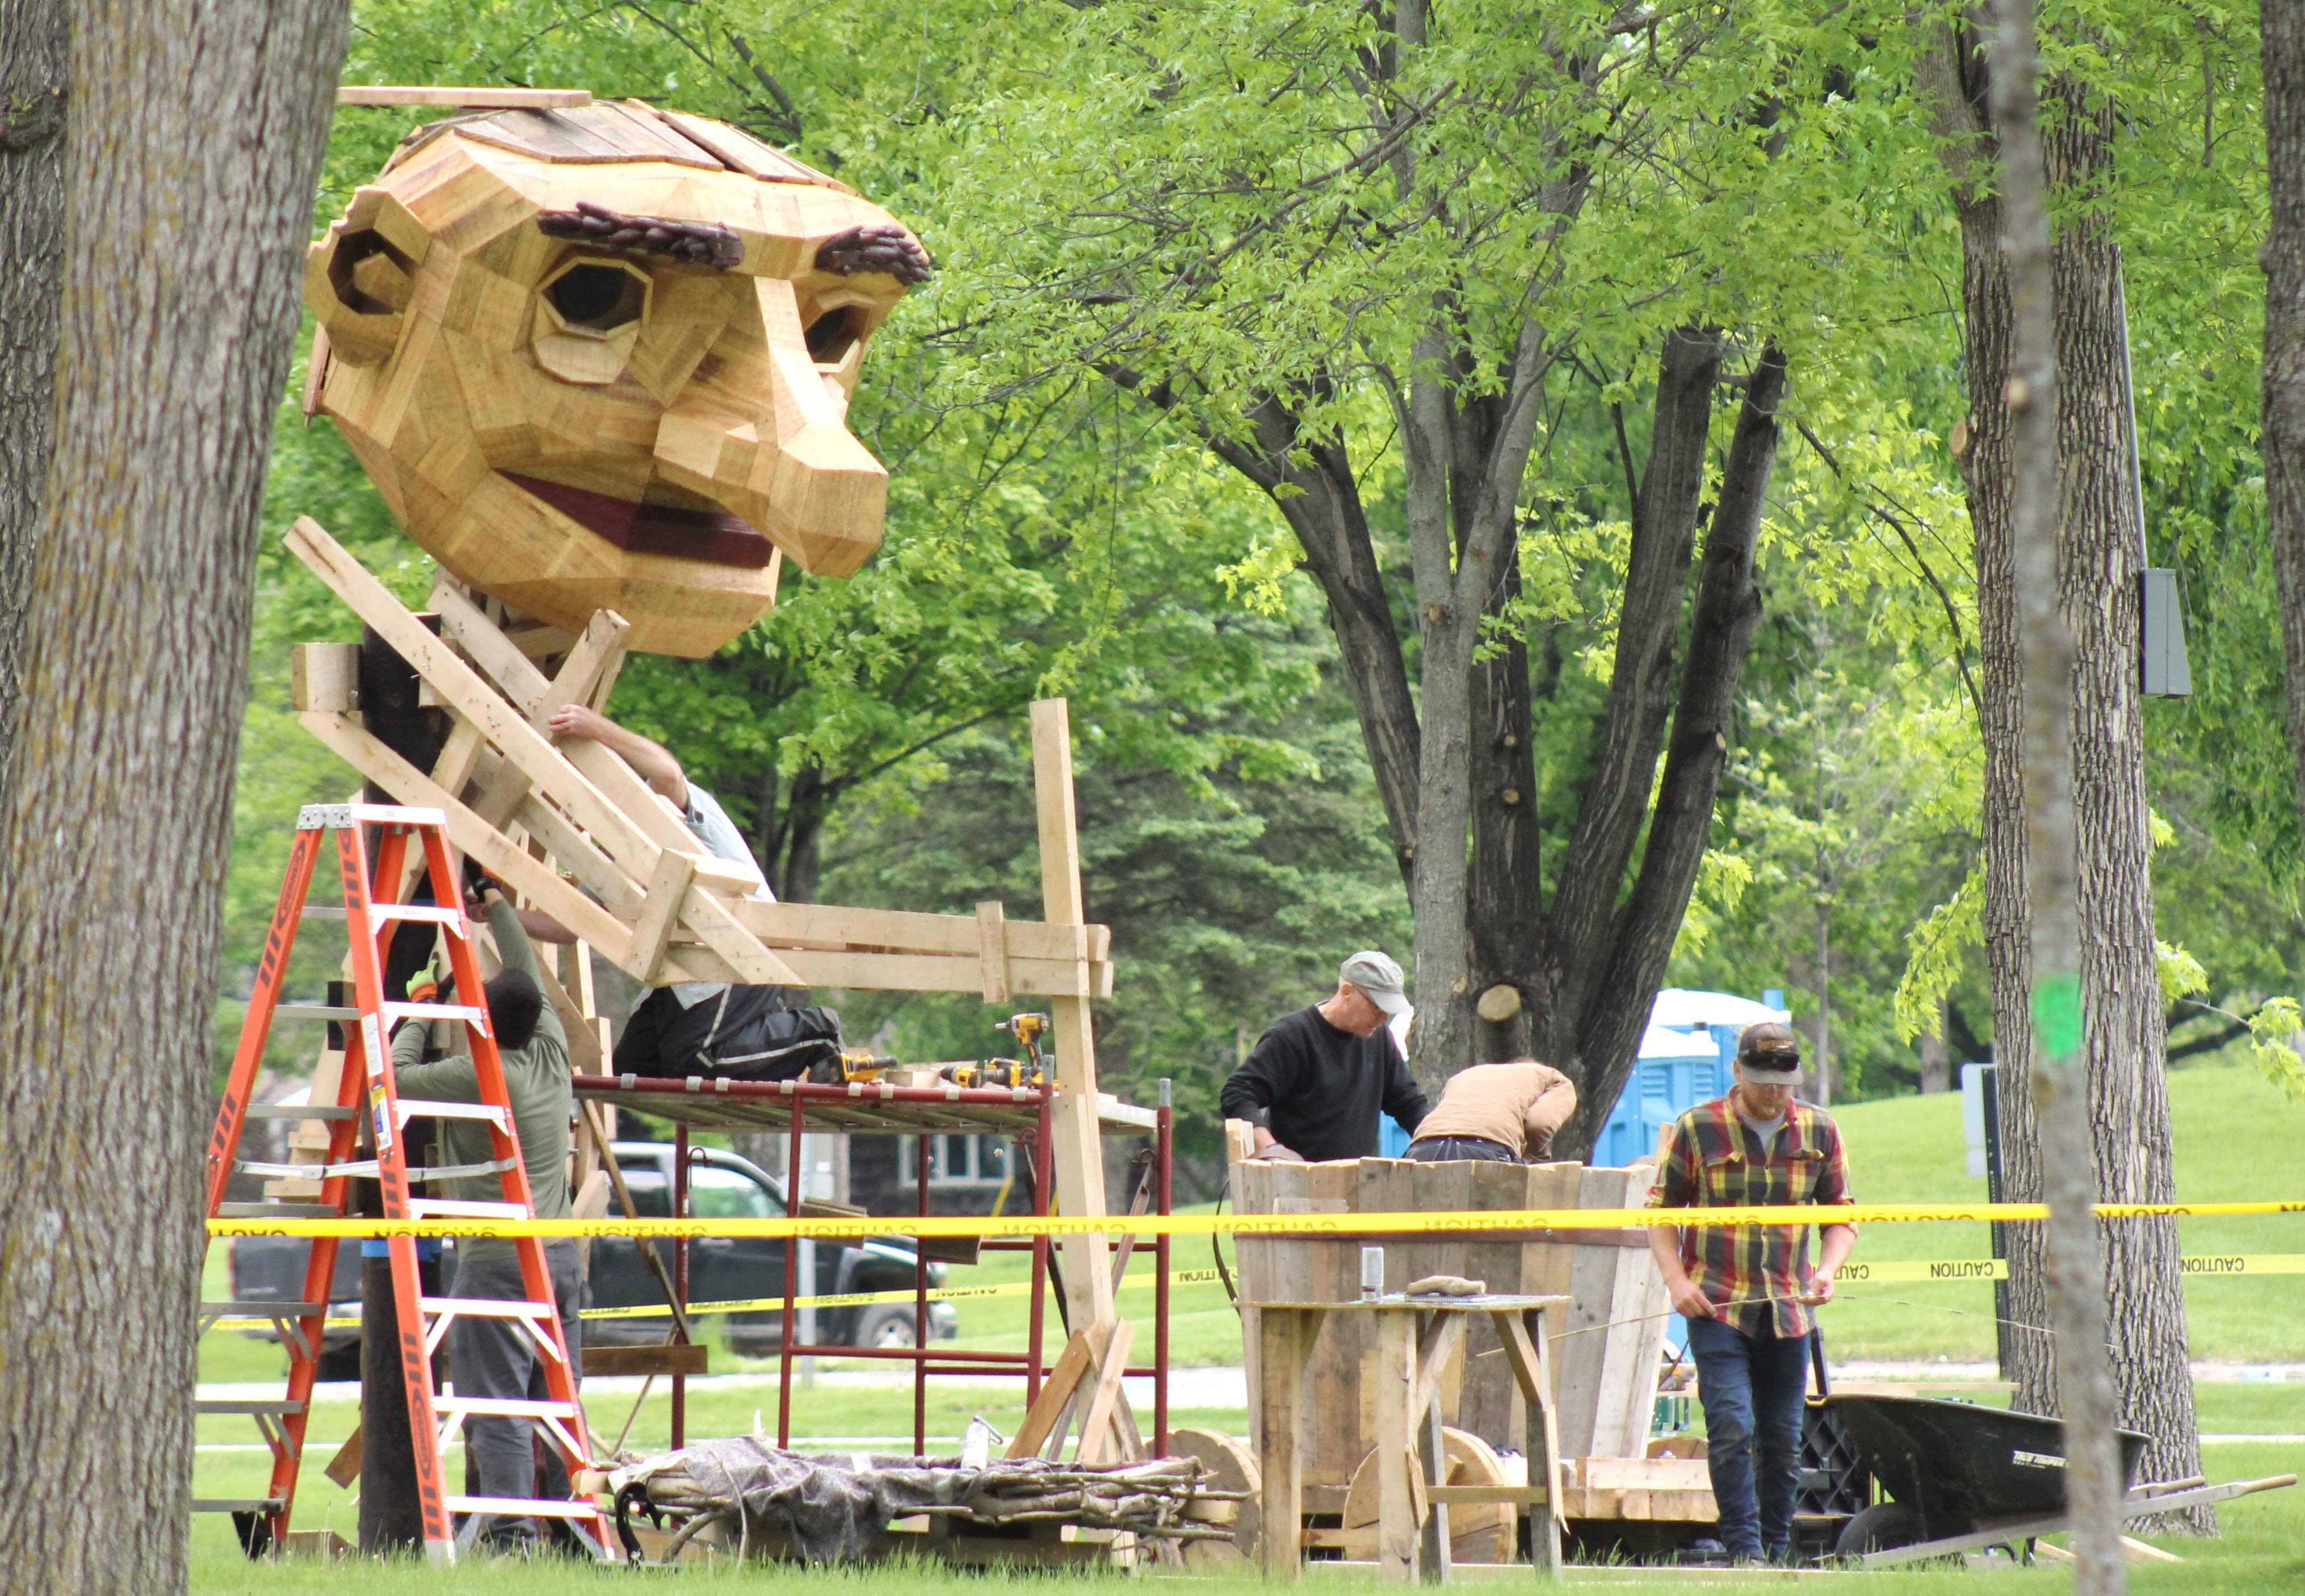 5 massive trolls coming to life in Detroit Lakes